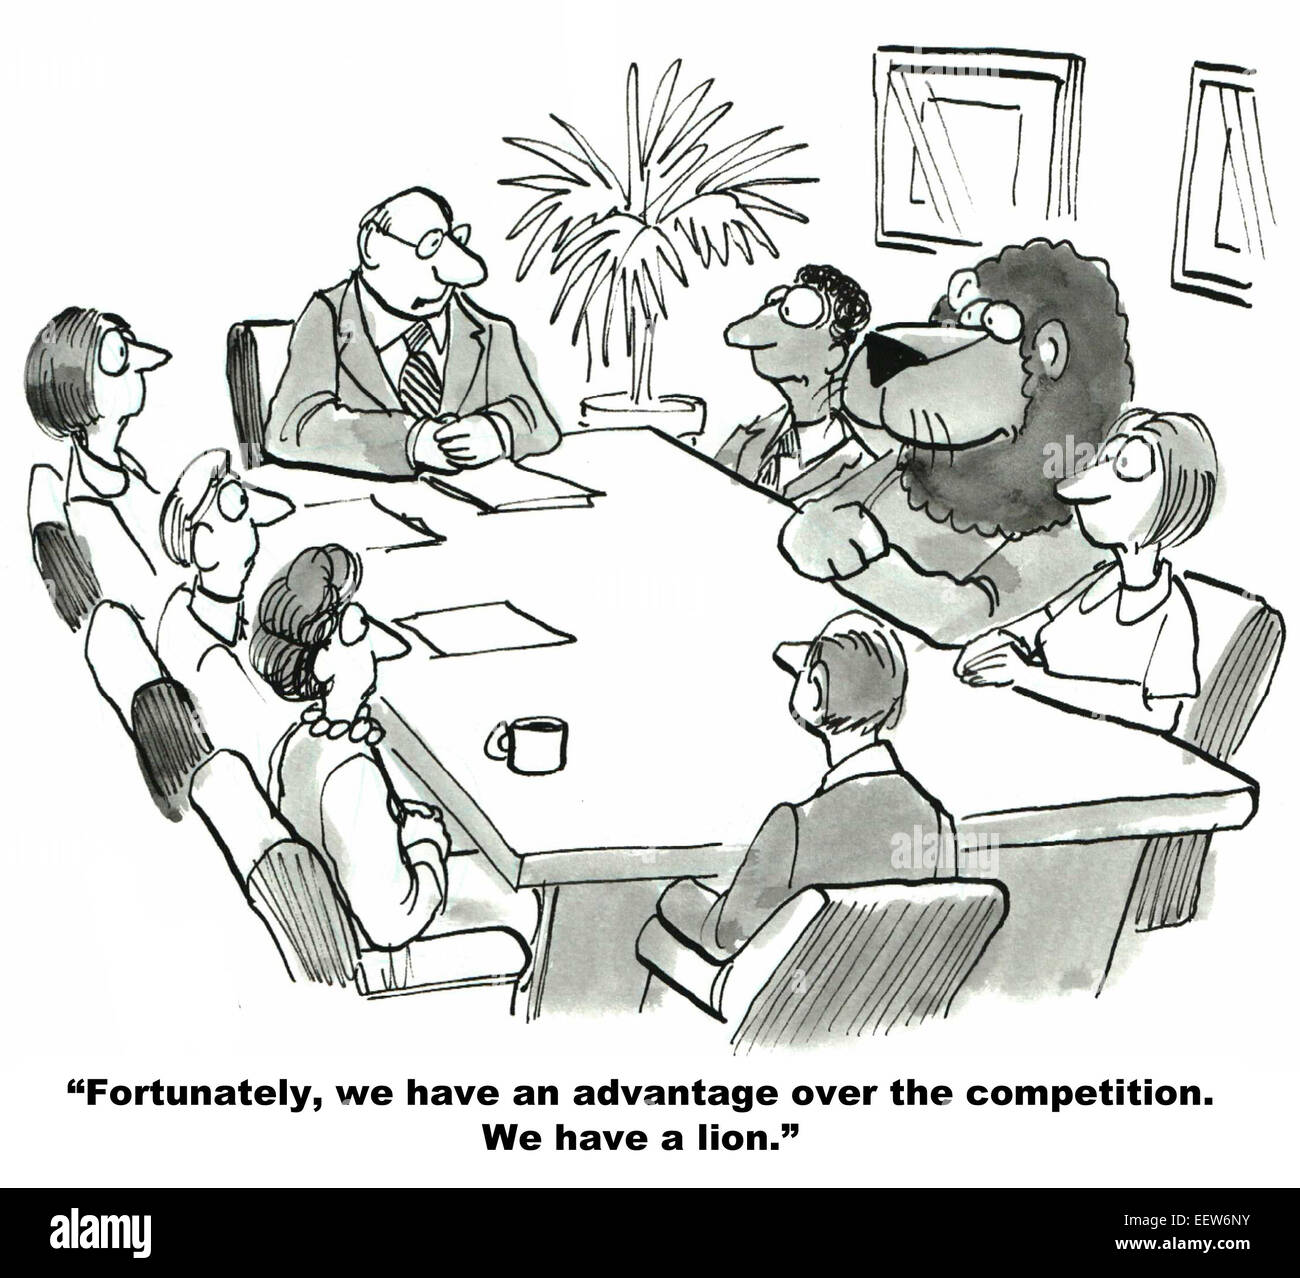 Cartoon of a business meeting and the leader is saying they have a competitive advantage, they have a lion. Stock Photo